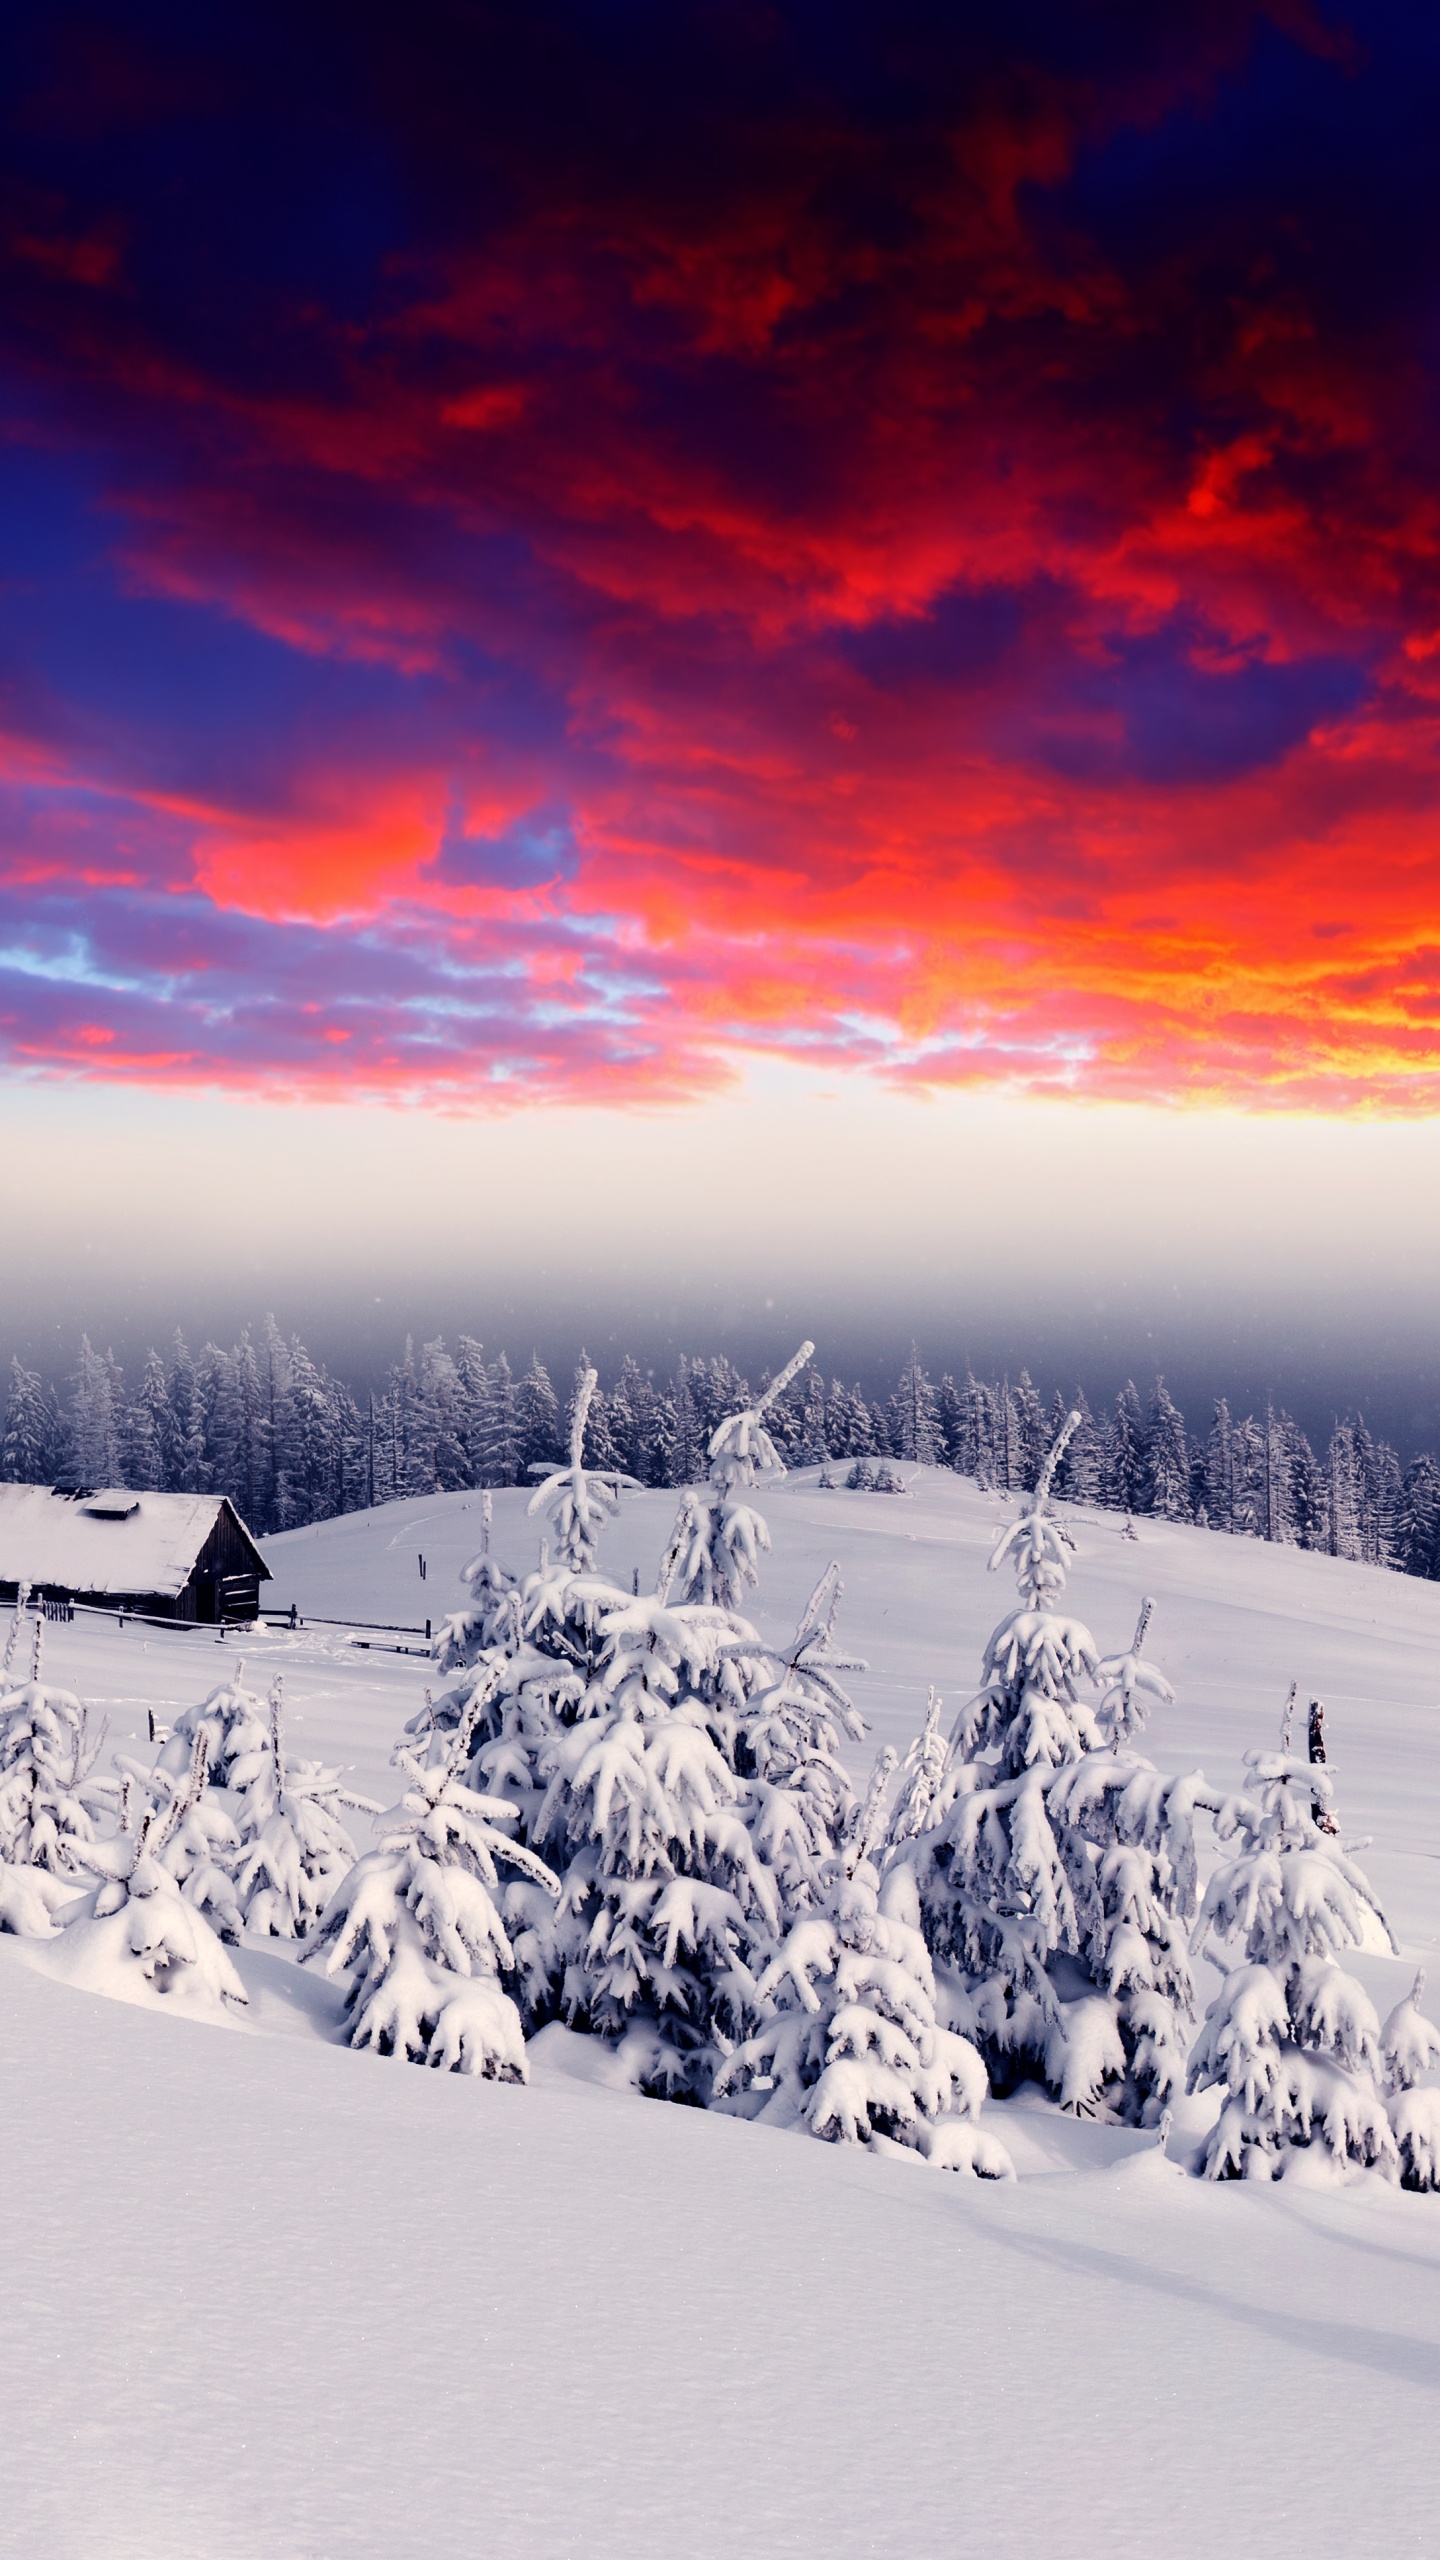 Snow Covered Field During Sunset. Wallpaper in 1440x2560 Resolution